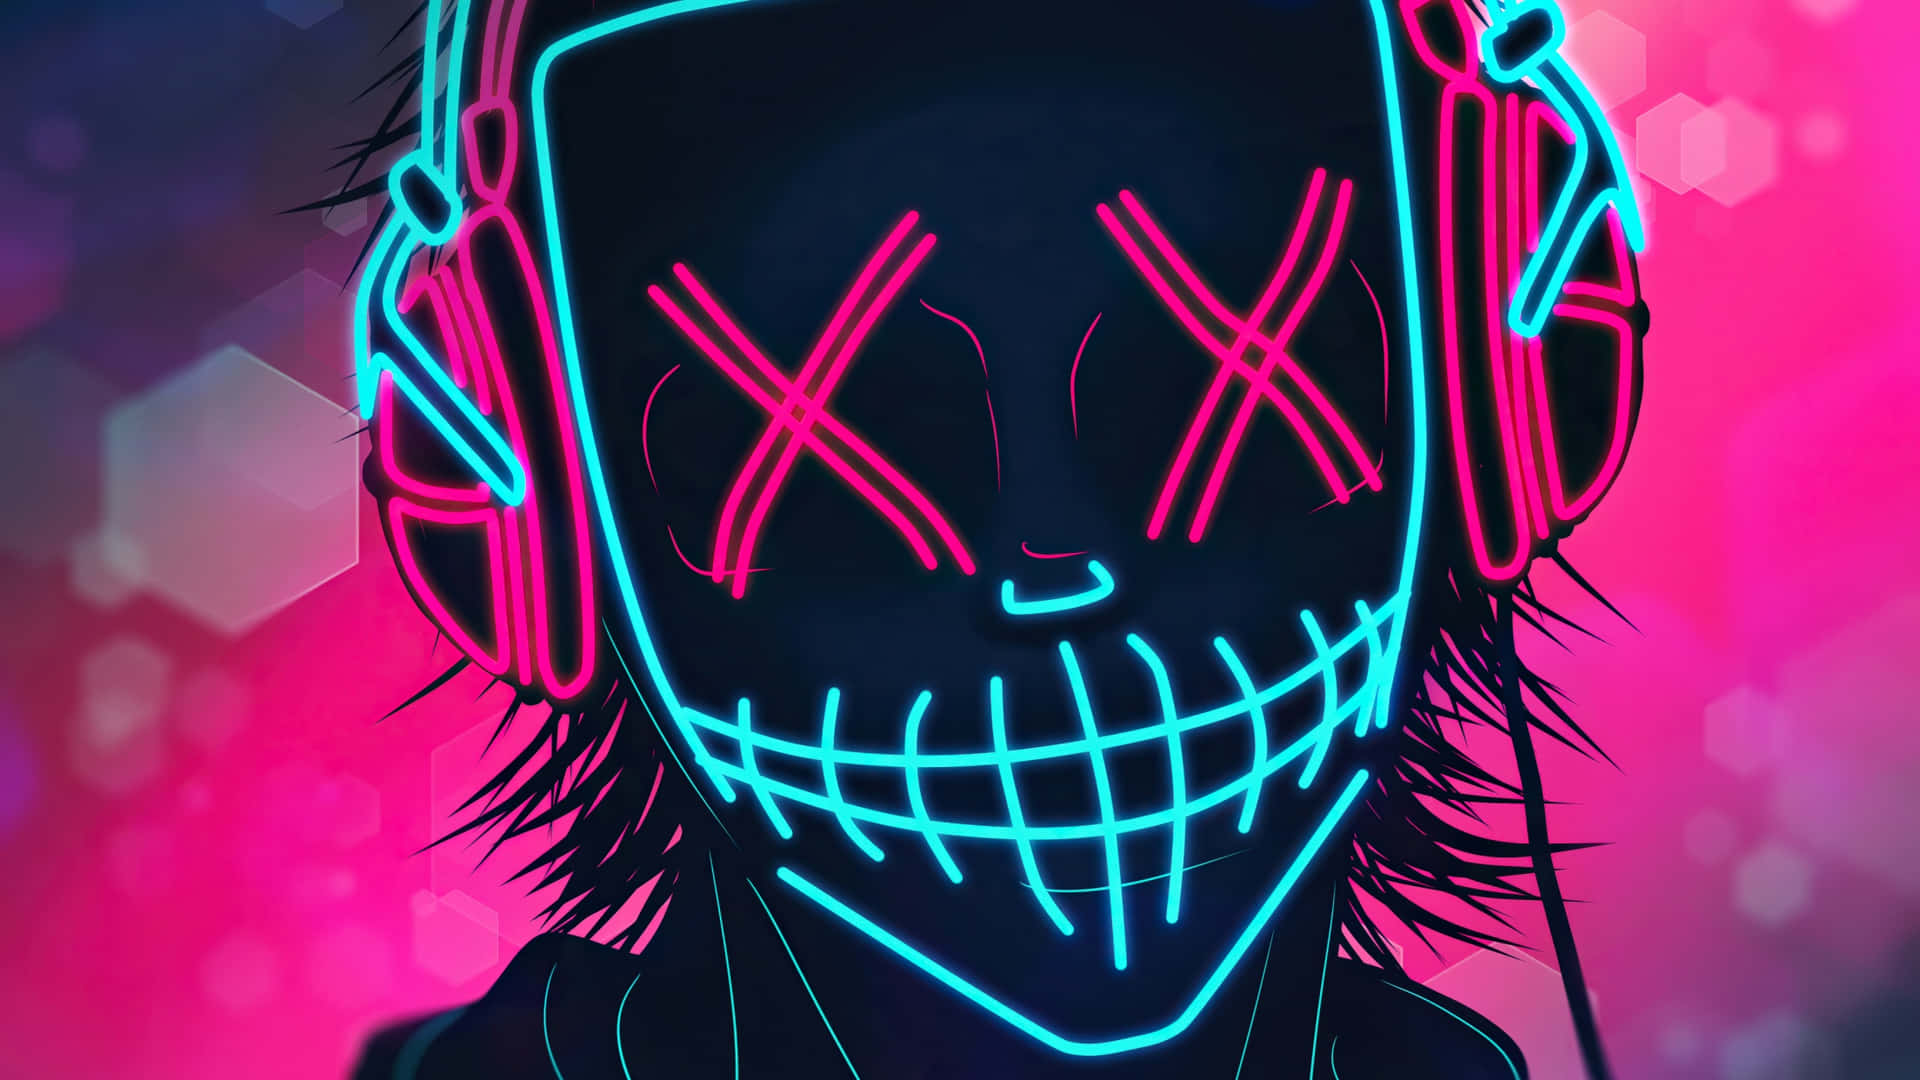 A Neon Skull With Headphones On His Head Wallpaper